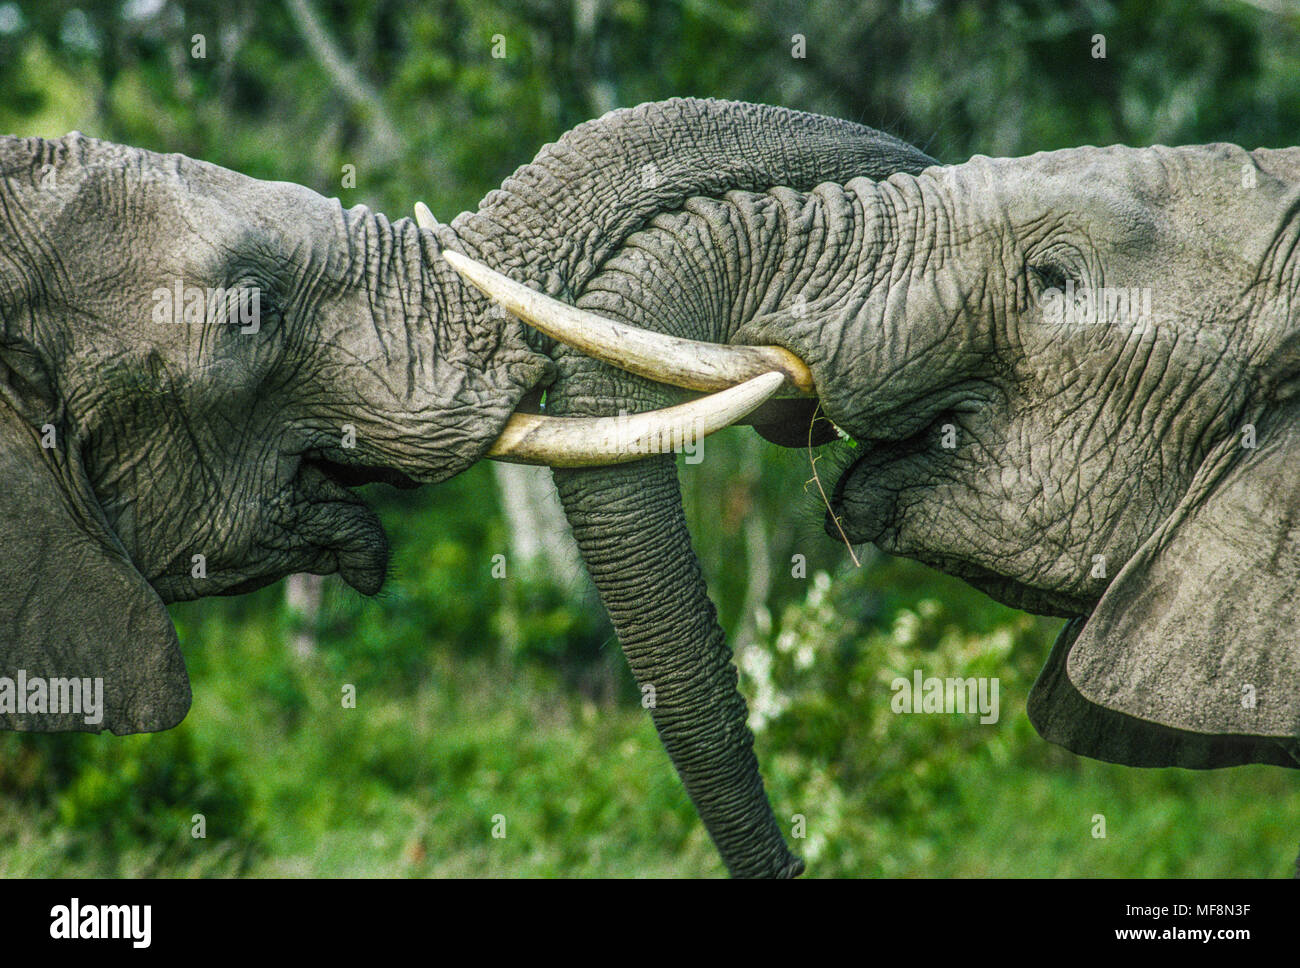 Elephant siblings greeting, part of a family group, Serengeti National Park, Tanzania. as of 2013 Tanzania is losing 70 elephants a day to poaching. Stock Photo